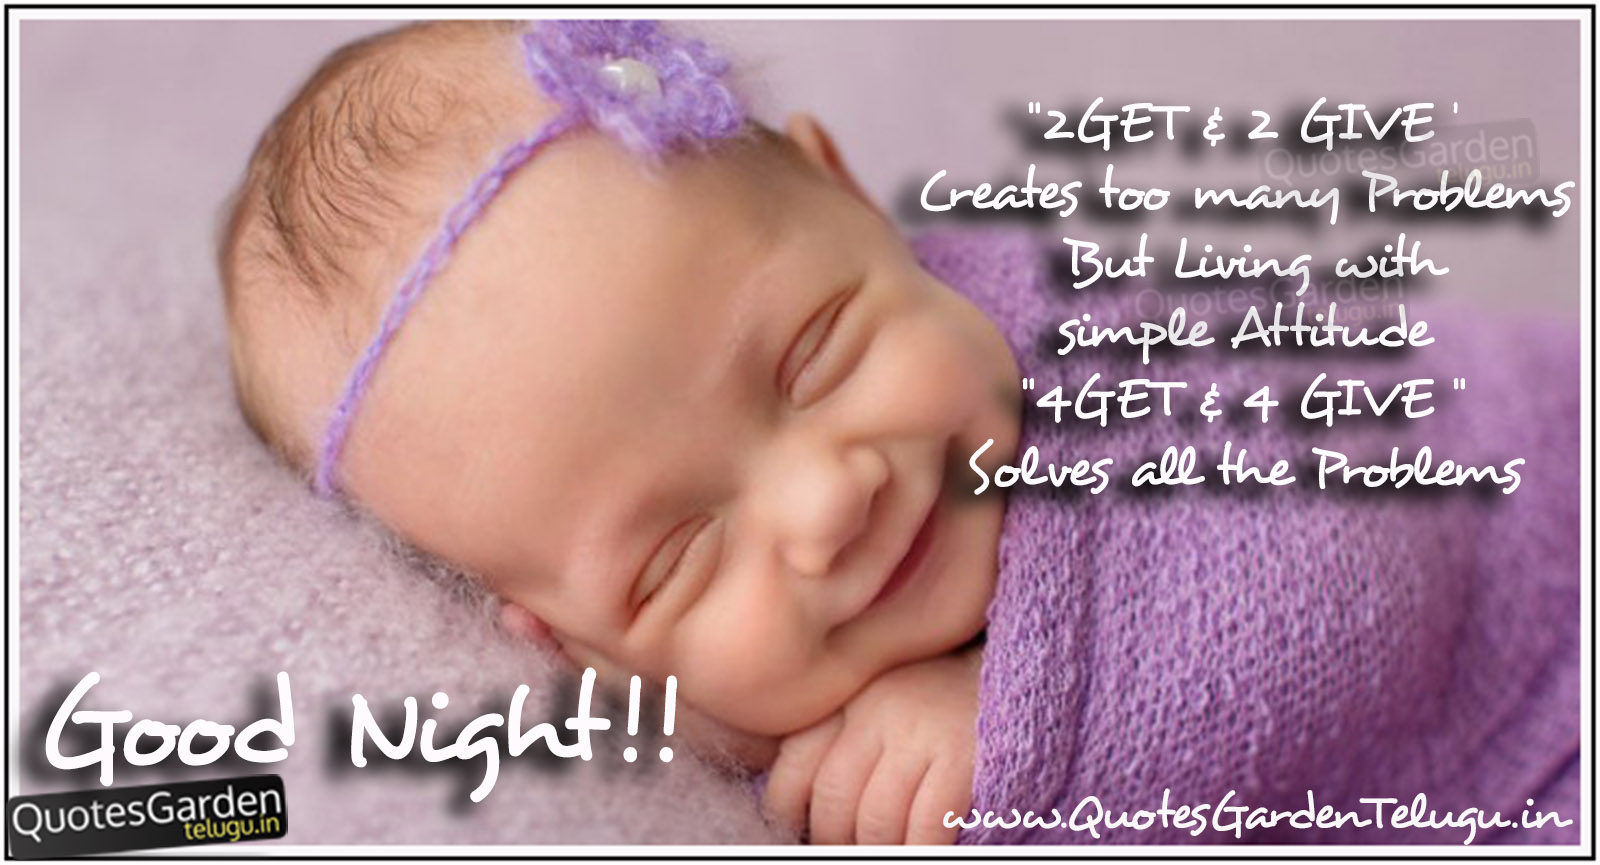 Good night Greetings messages with Cute kids wallpapers | QUOTES GARDEN ...